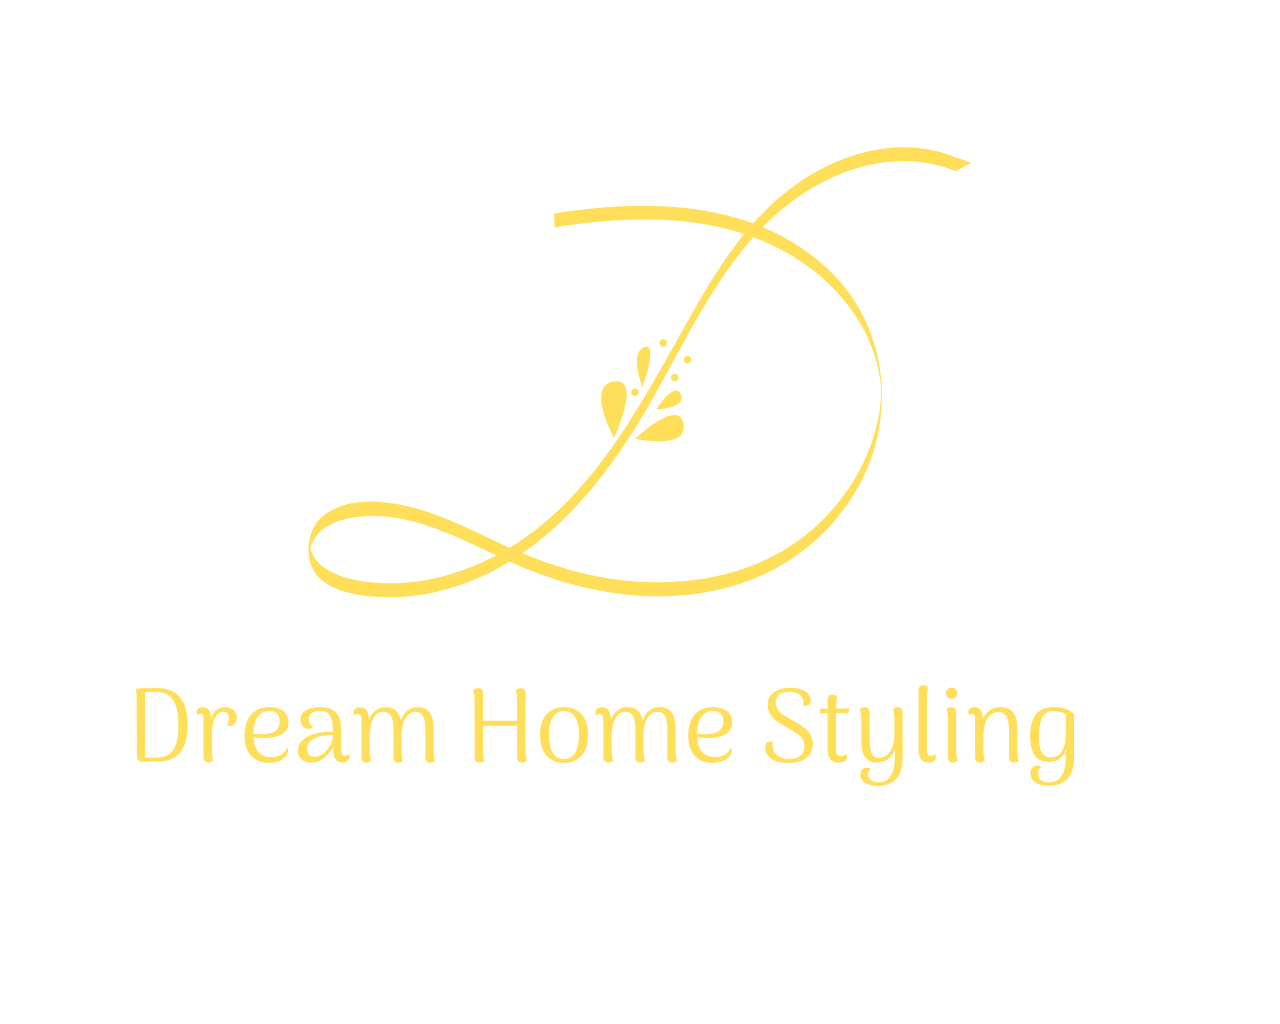 Dream Home Styling